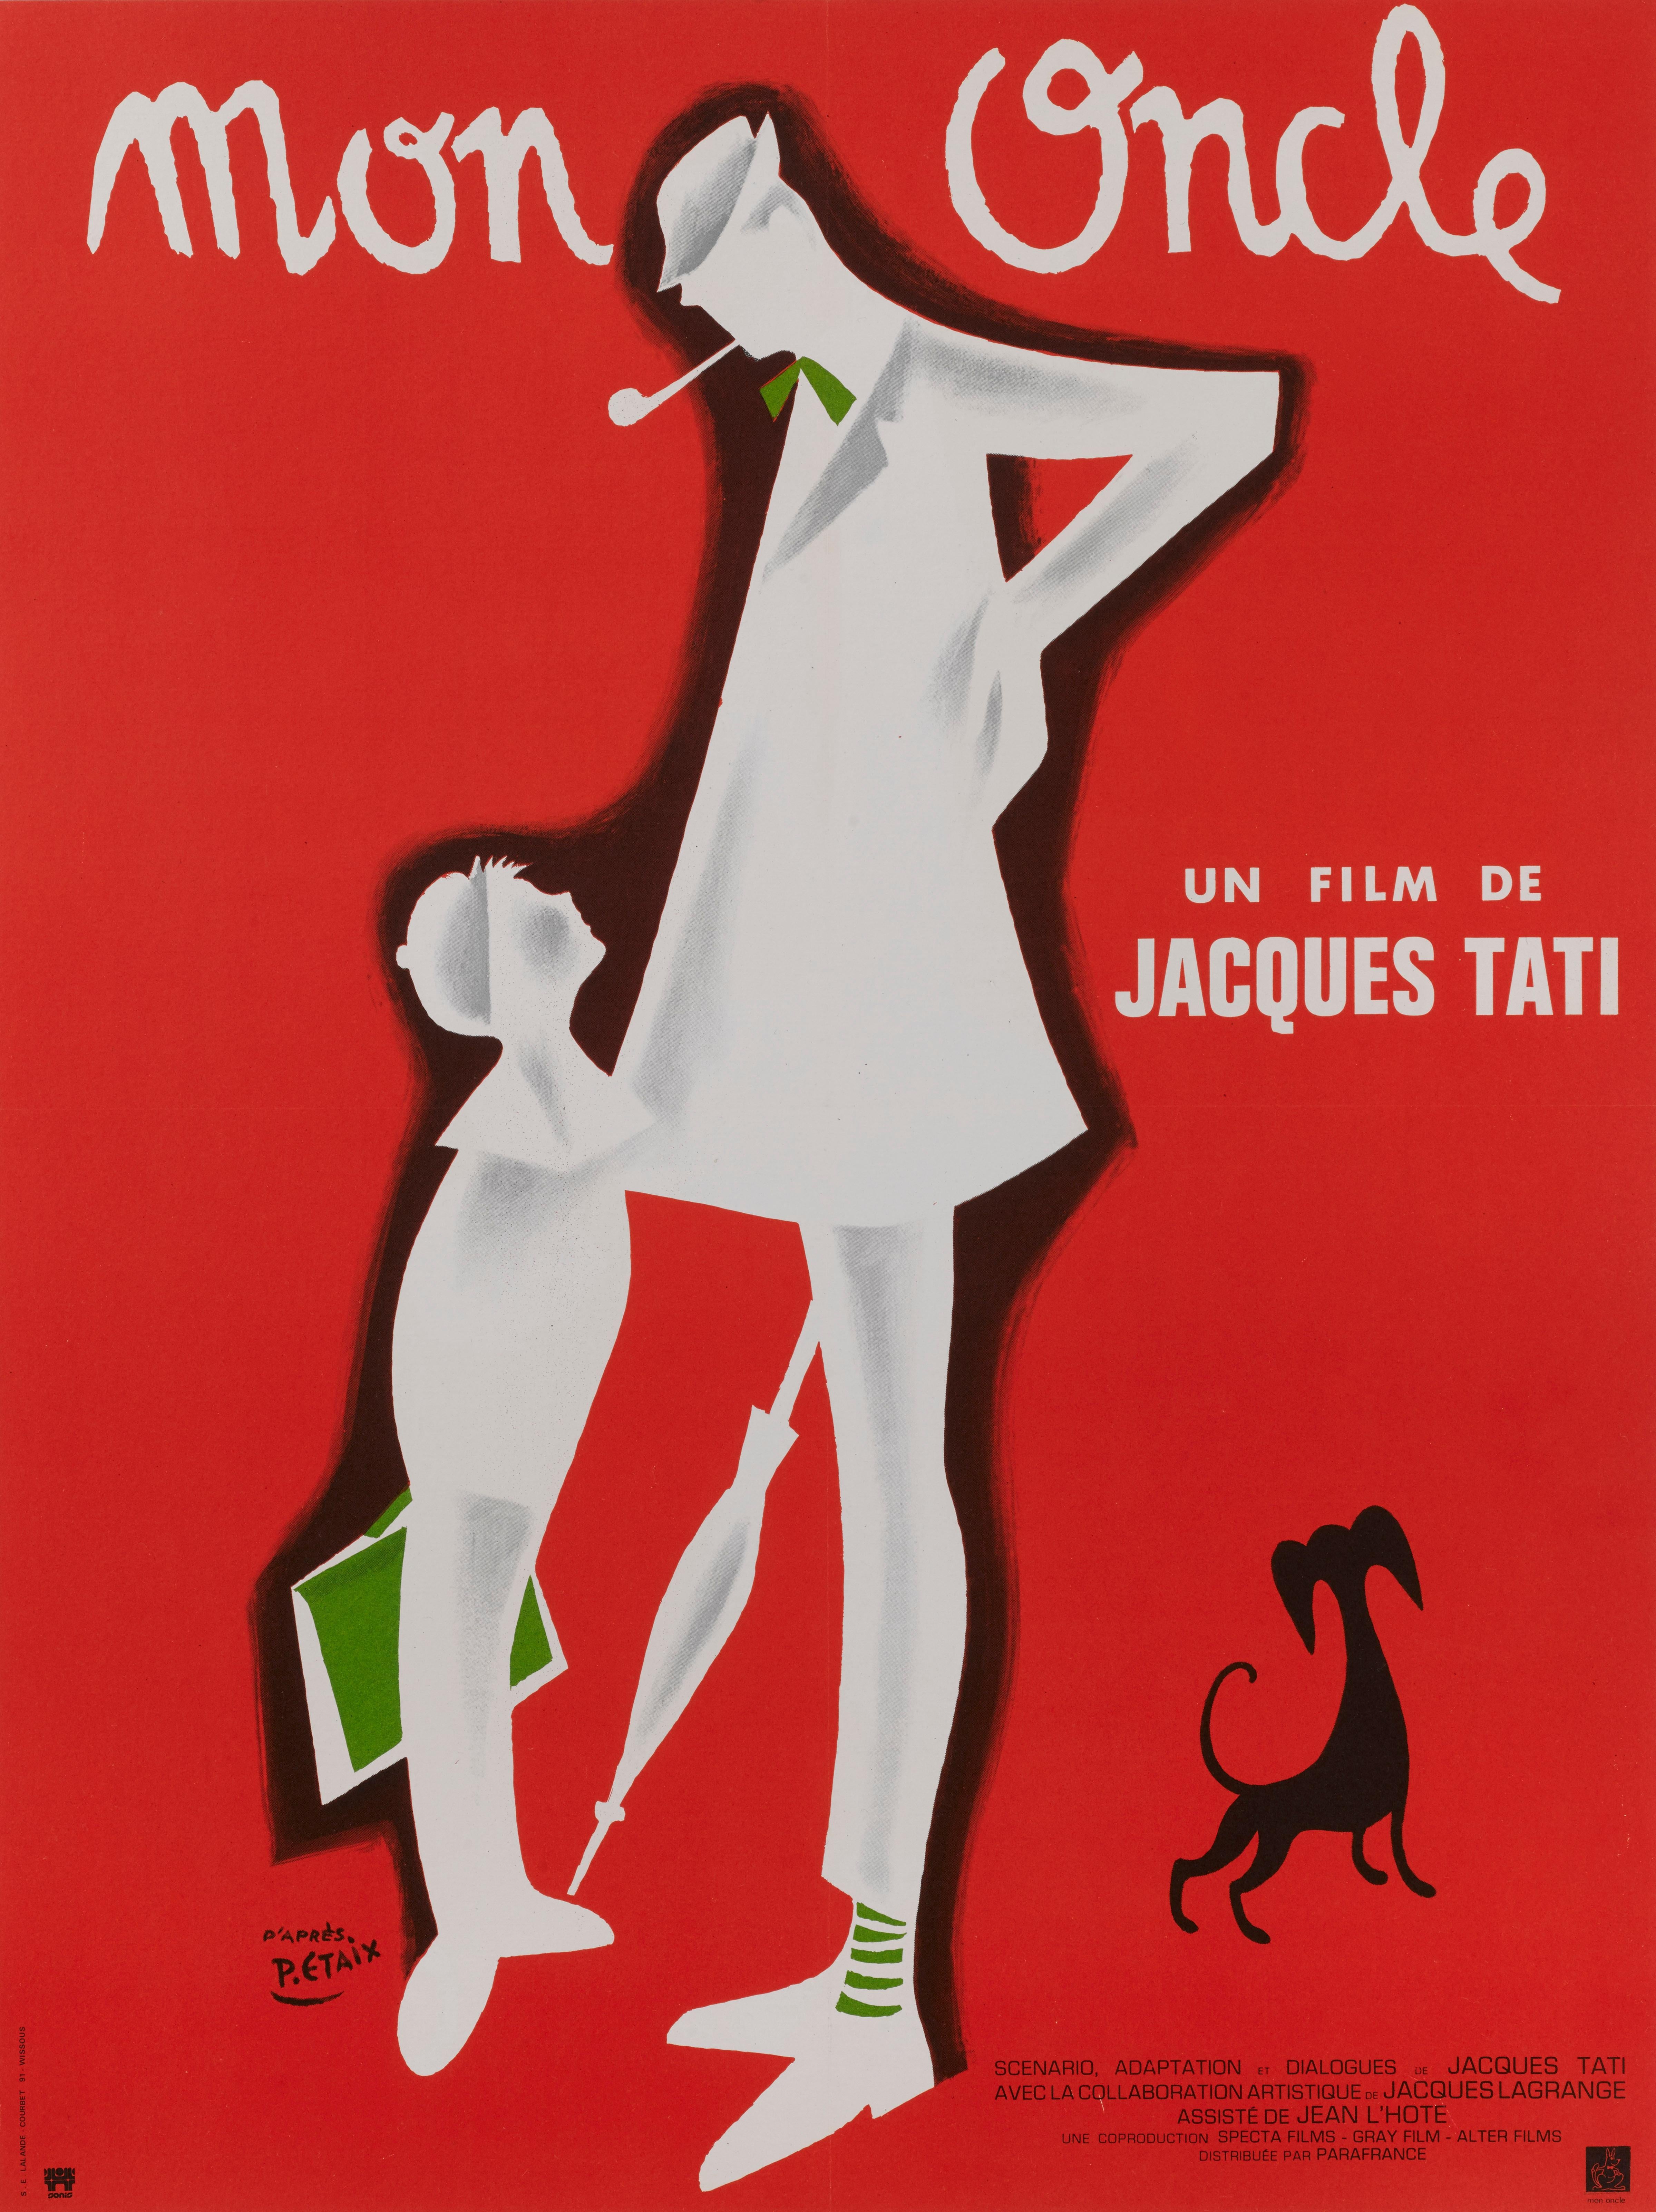 Original French movie poster for Jacques Tati's French new wave classic 1958 film. Directed and staring Jacques Tati. The artwork is by the famous French illustrator Pierre Etaix (b.1928). This poster designed was printed for the rerelease of the